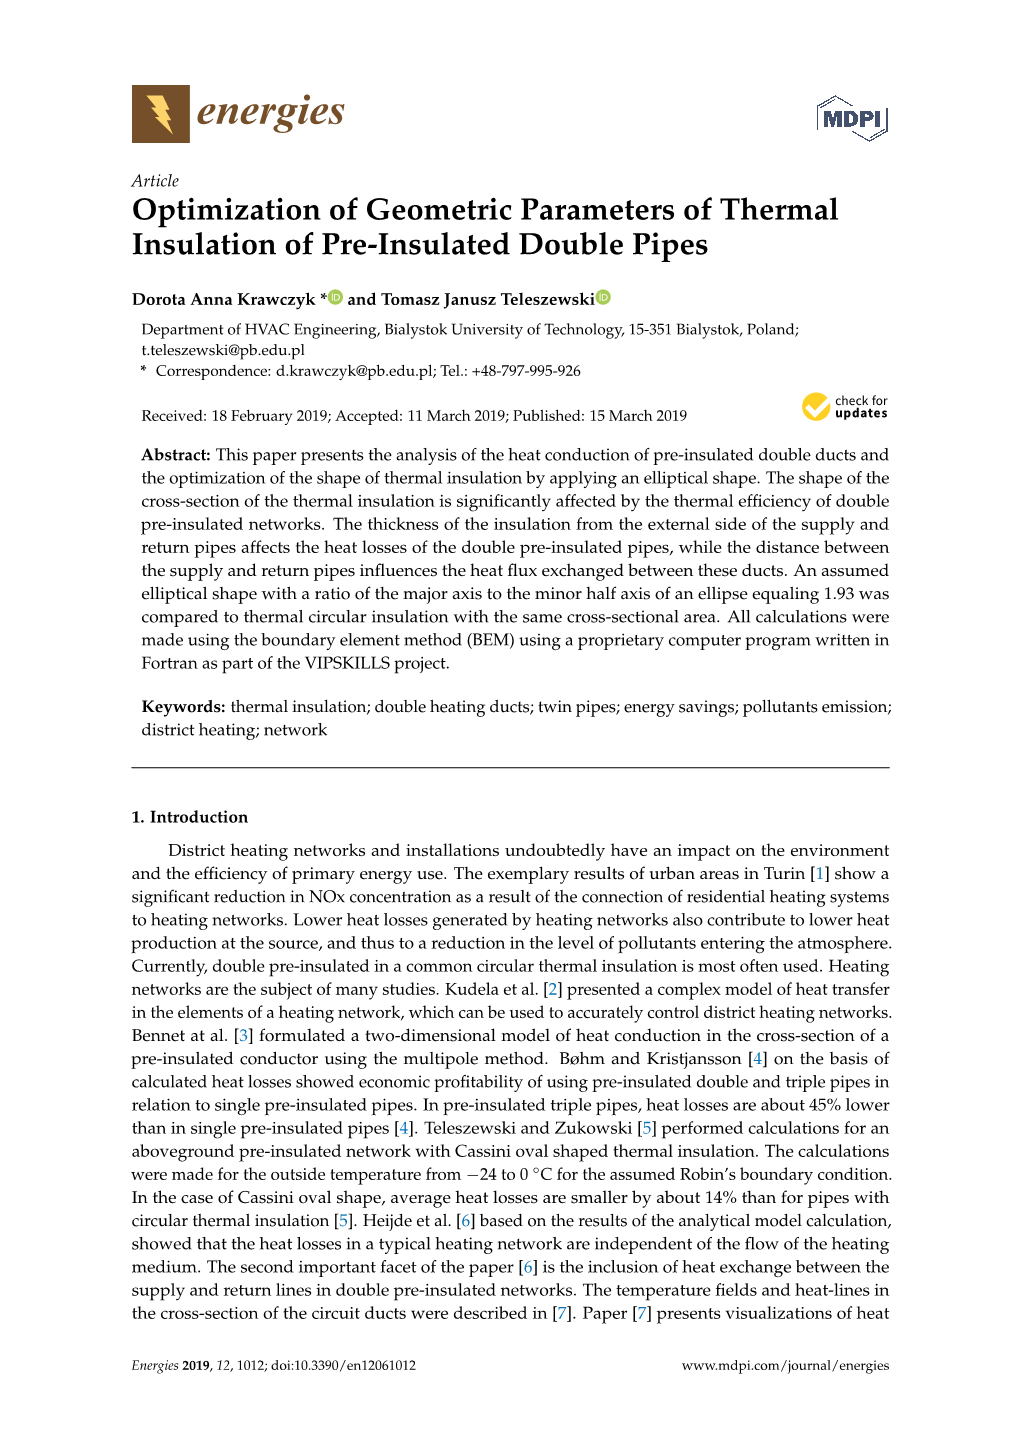 Optimization of Geometric Parameters of Thermal Insulation of Pre-Insulated Double Pipes